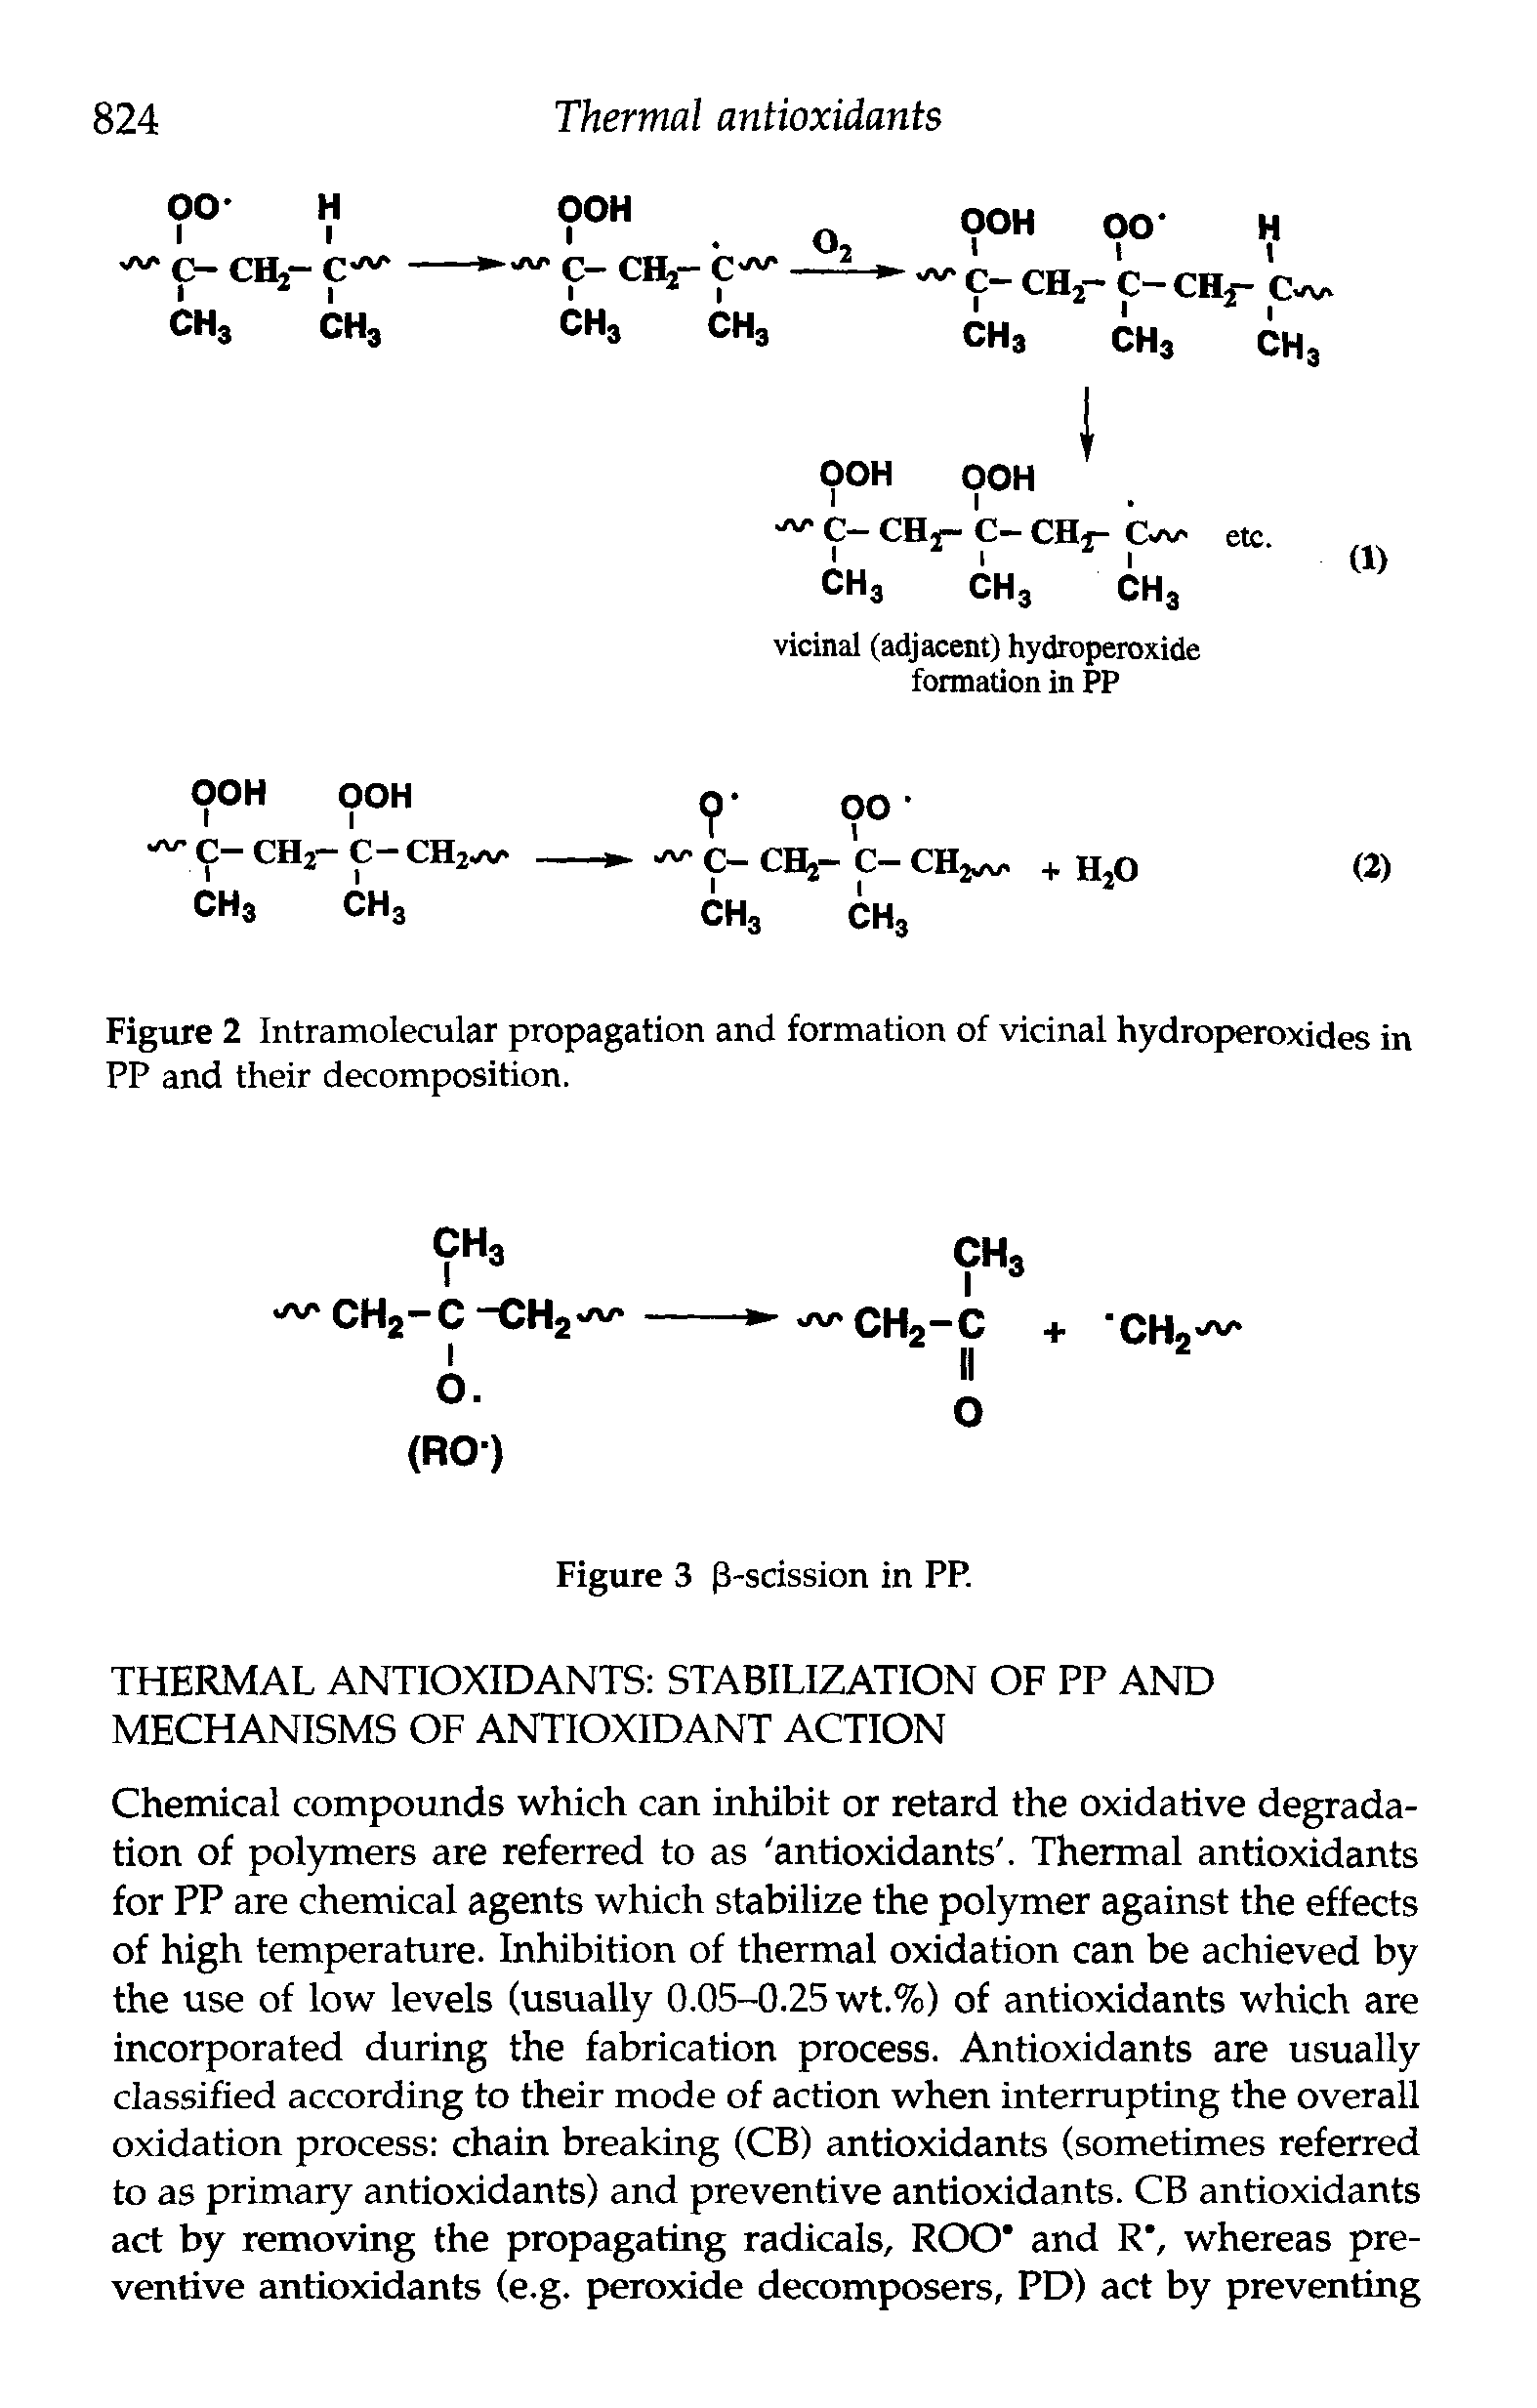 Figure 2 Intramolecular propagation and formation of vicinal hydroperoxides in PP and their decomposition.